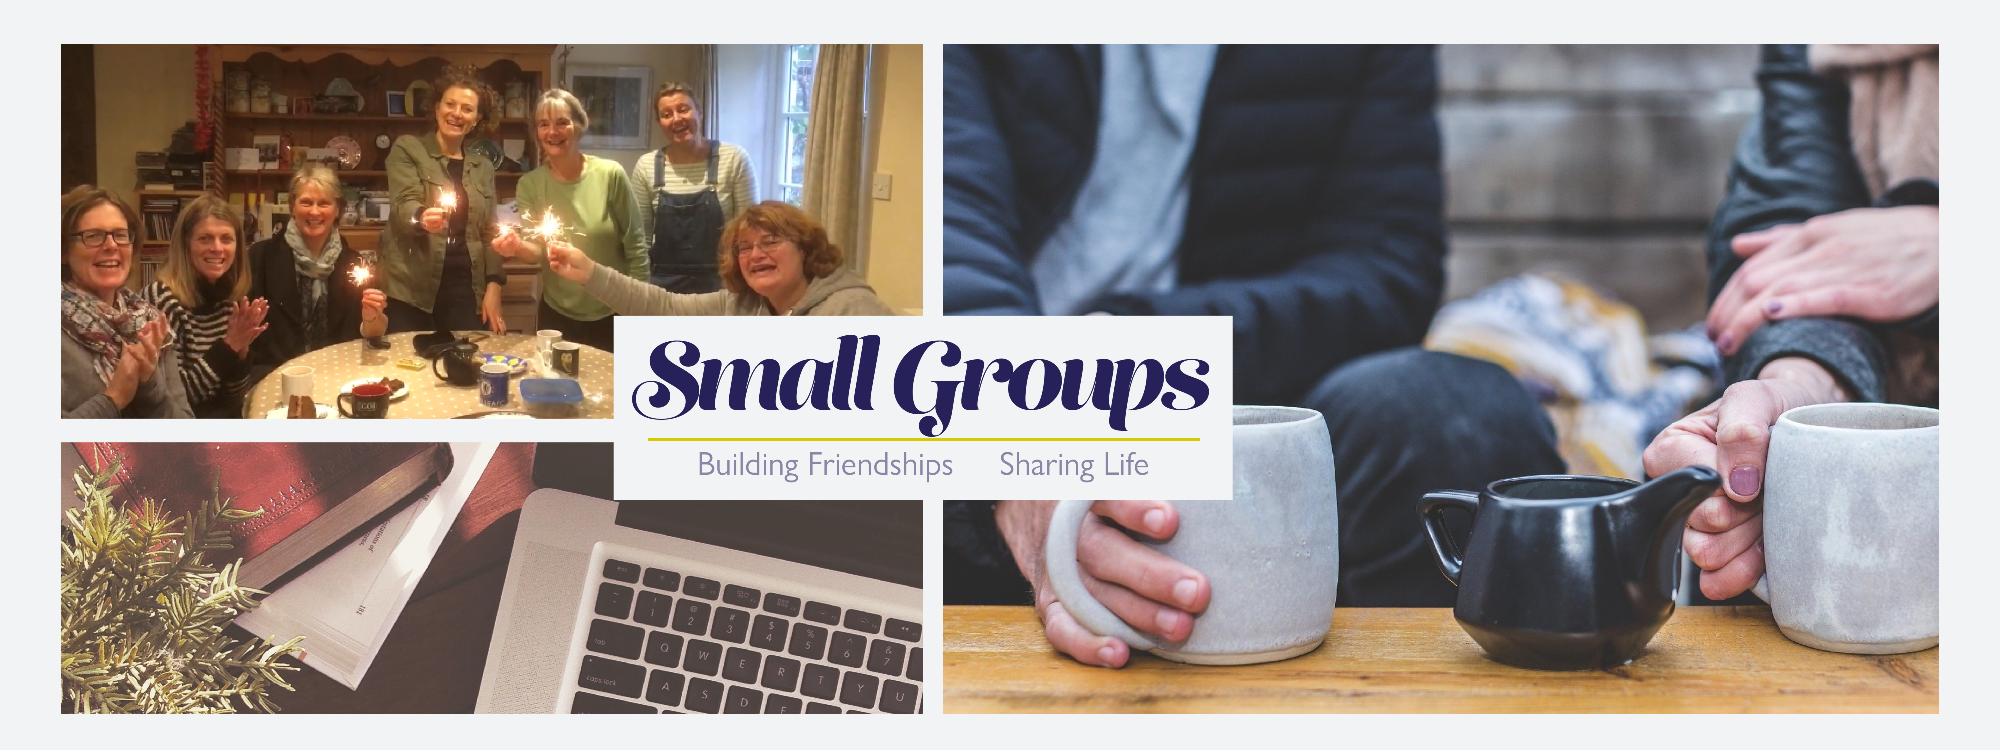 small groups generic